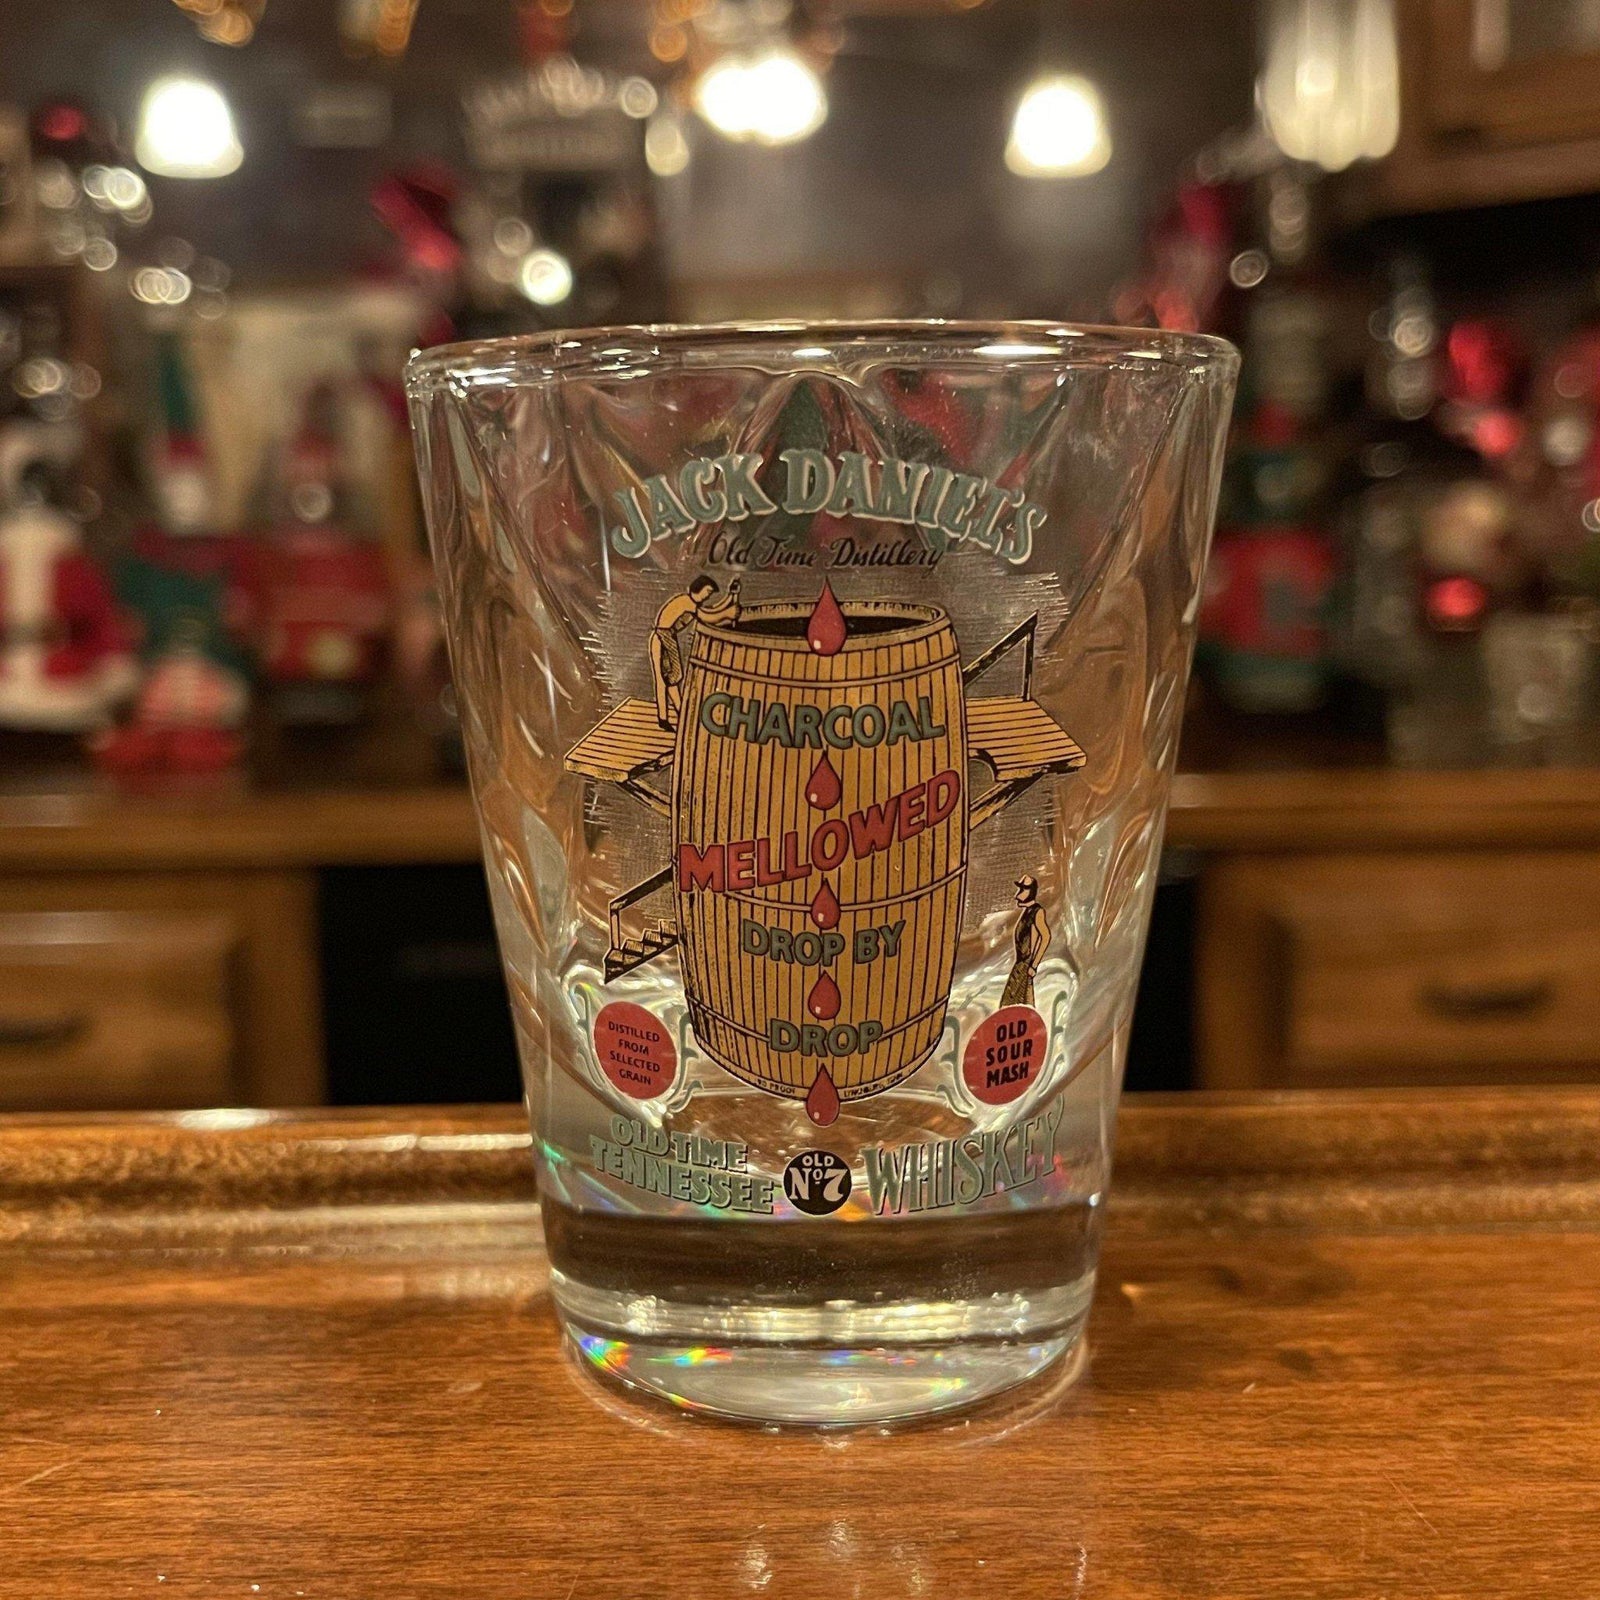 Jack Daniels Shot Glass Measuring Lines Old Time Sour Mash Tennessee  Whiskey No7